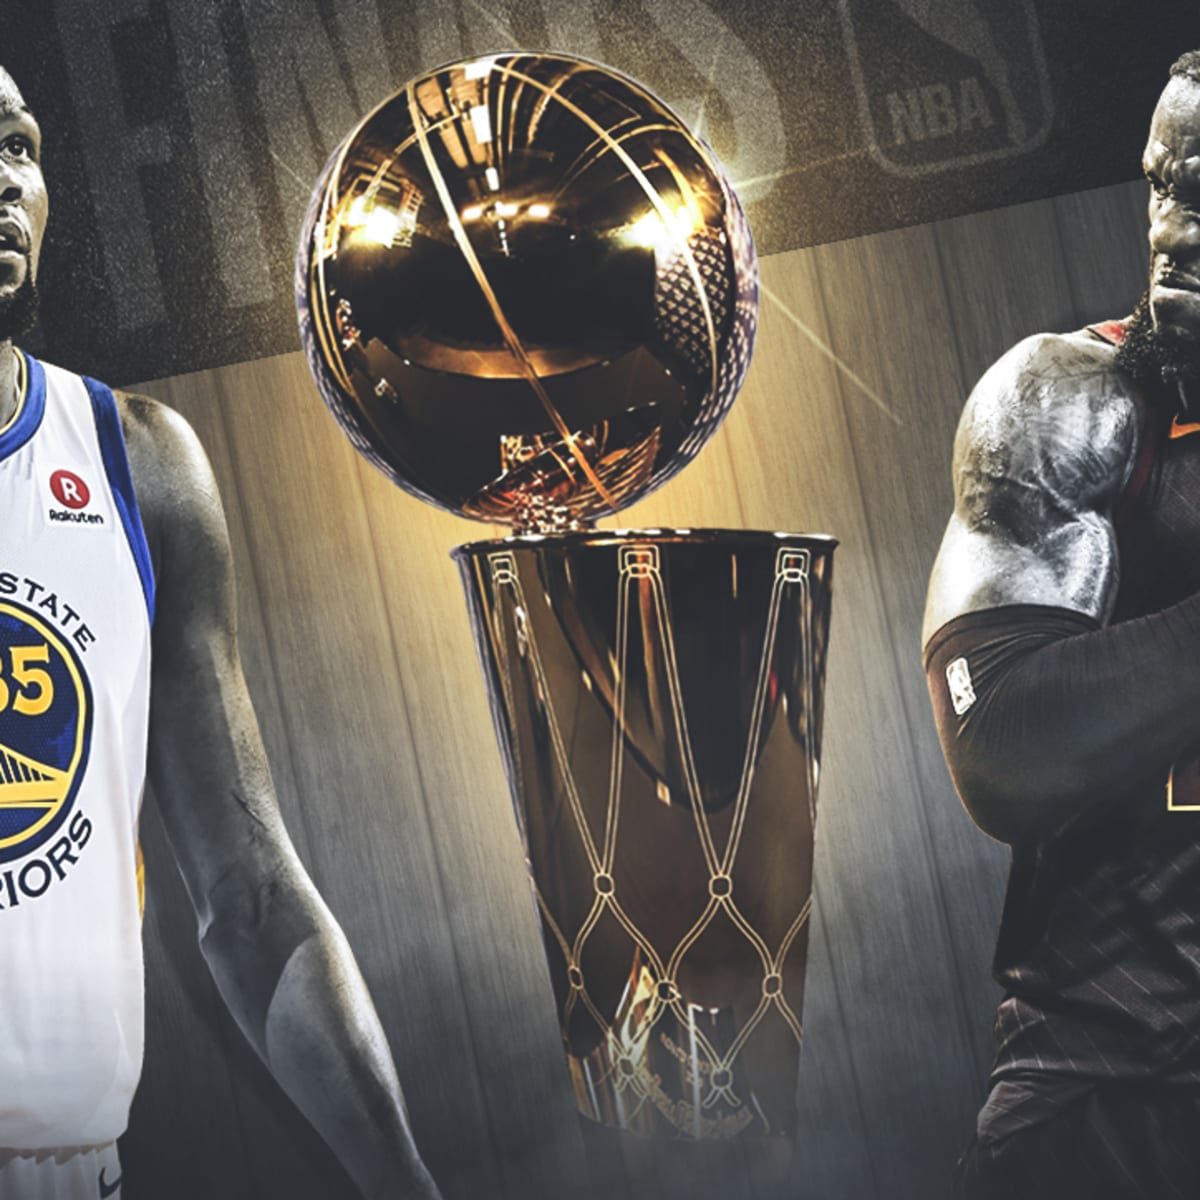 Celtics or Warriors? Our writers share their NBA finals predictions